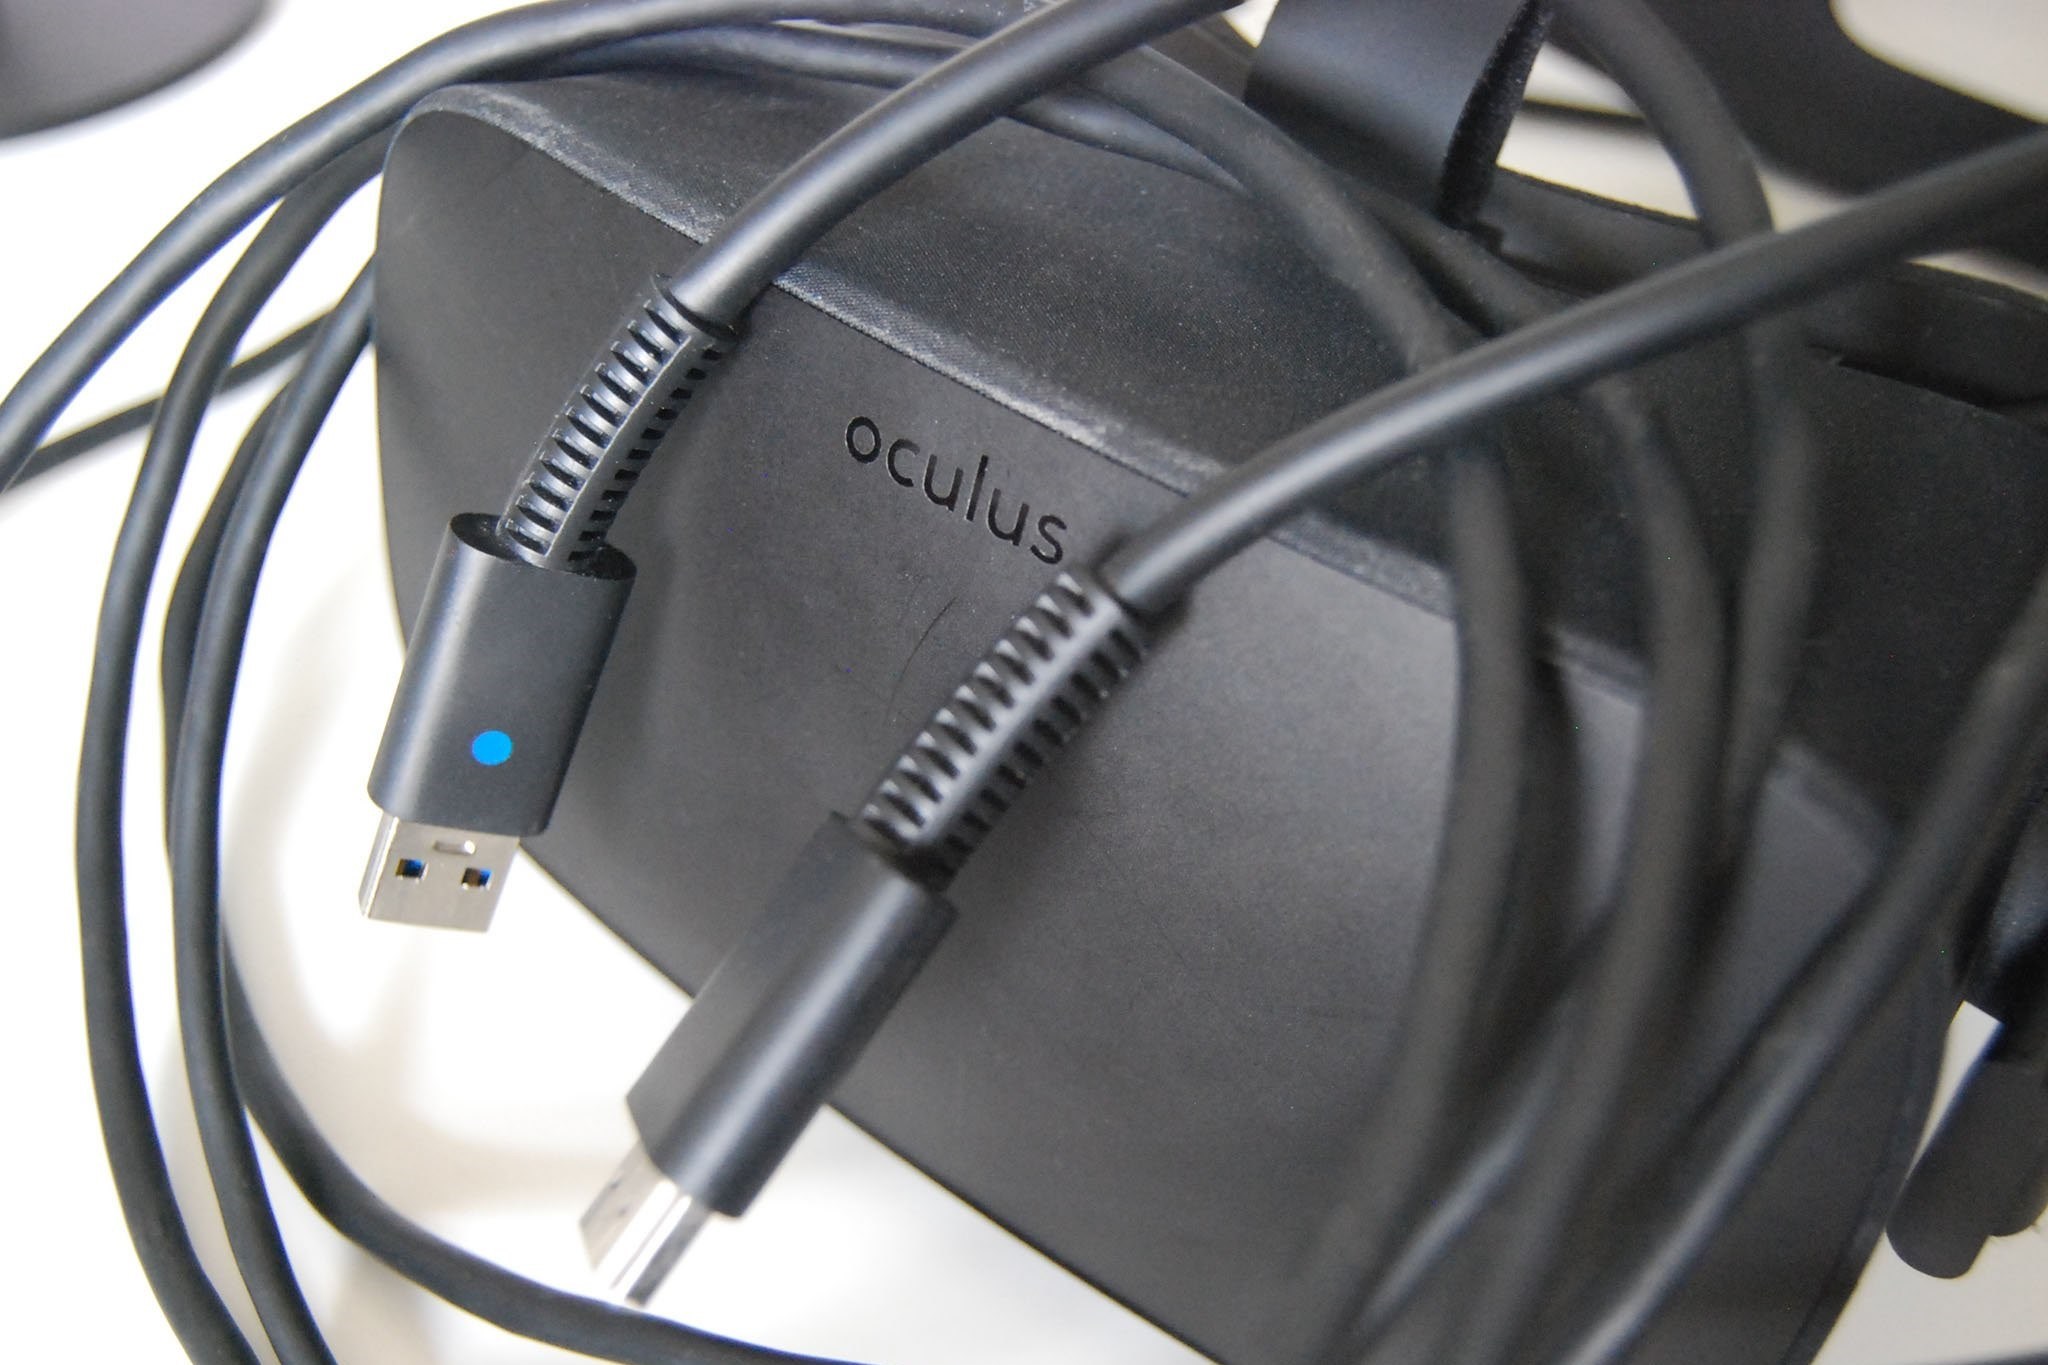 How Long Is The Oculus Rift Sensor Cable